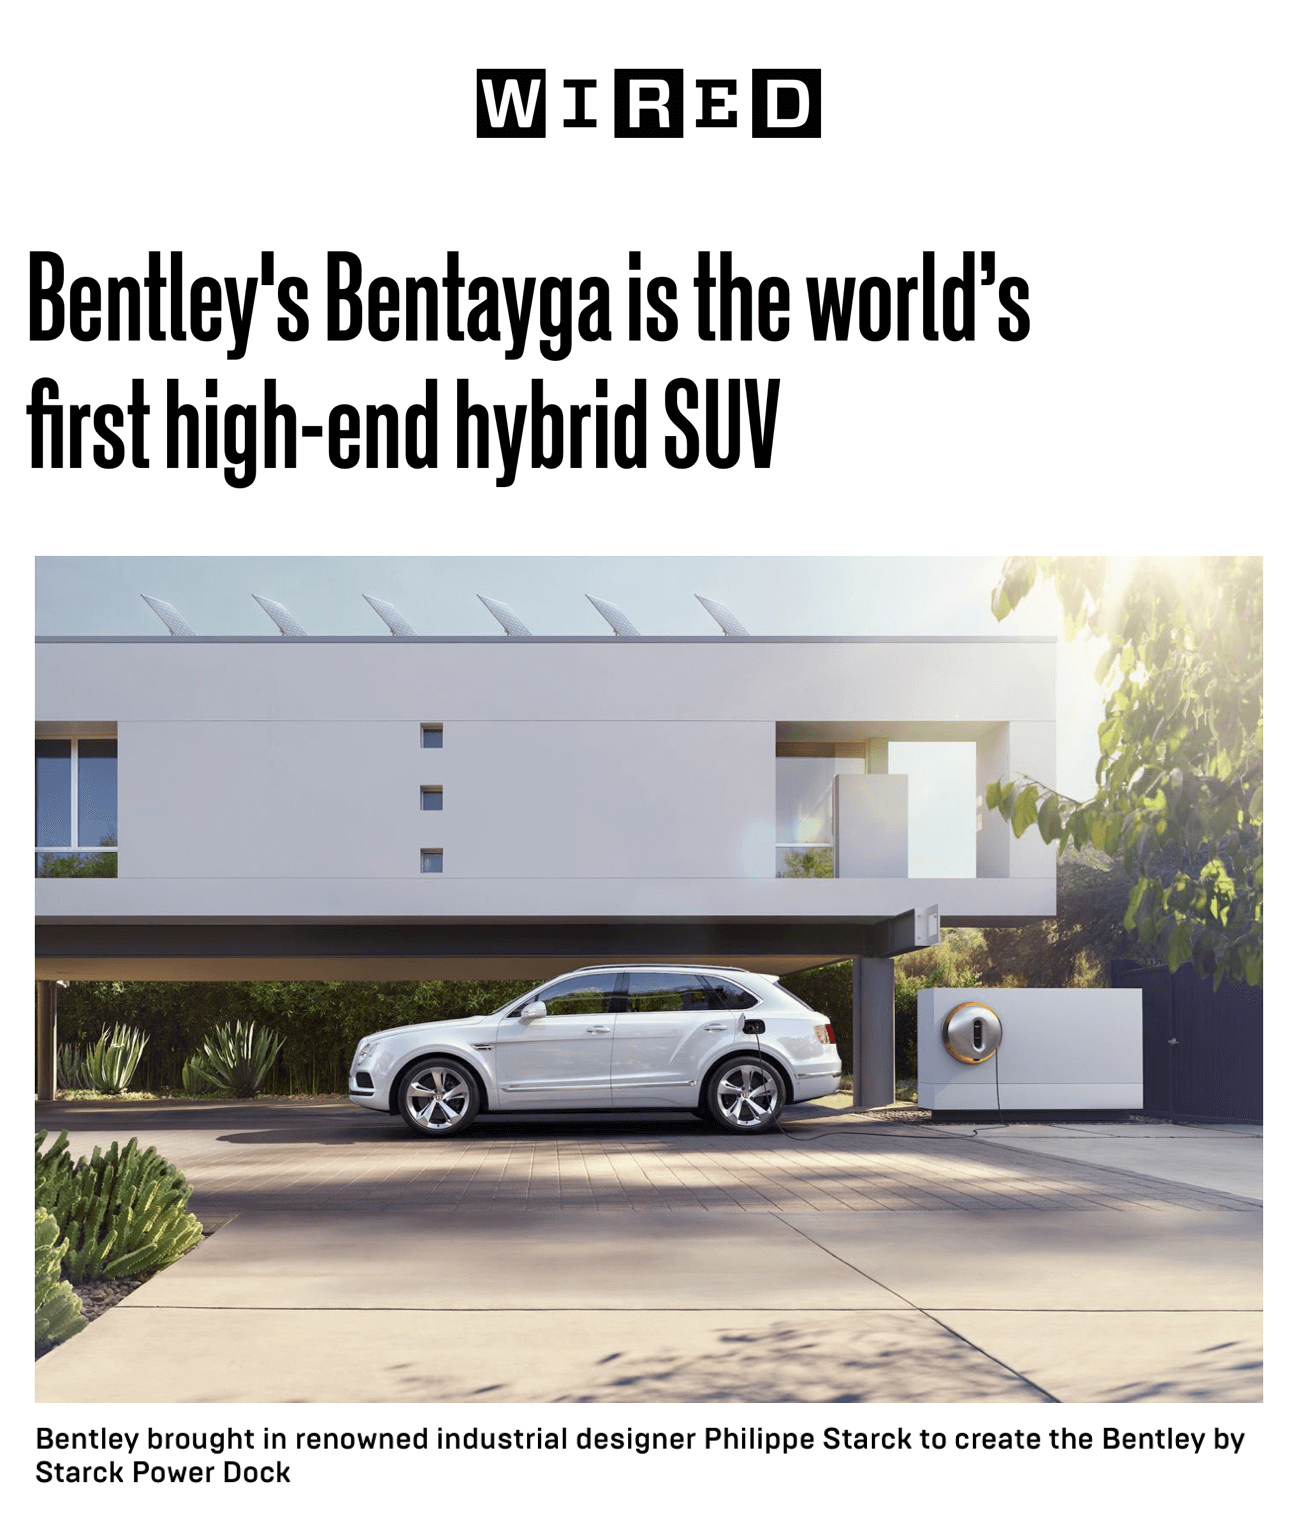 Bentley's Bentayga is the world’s first high-end hybrid SUV